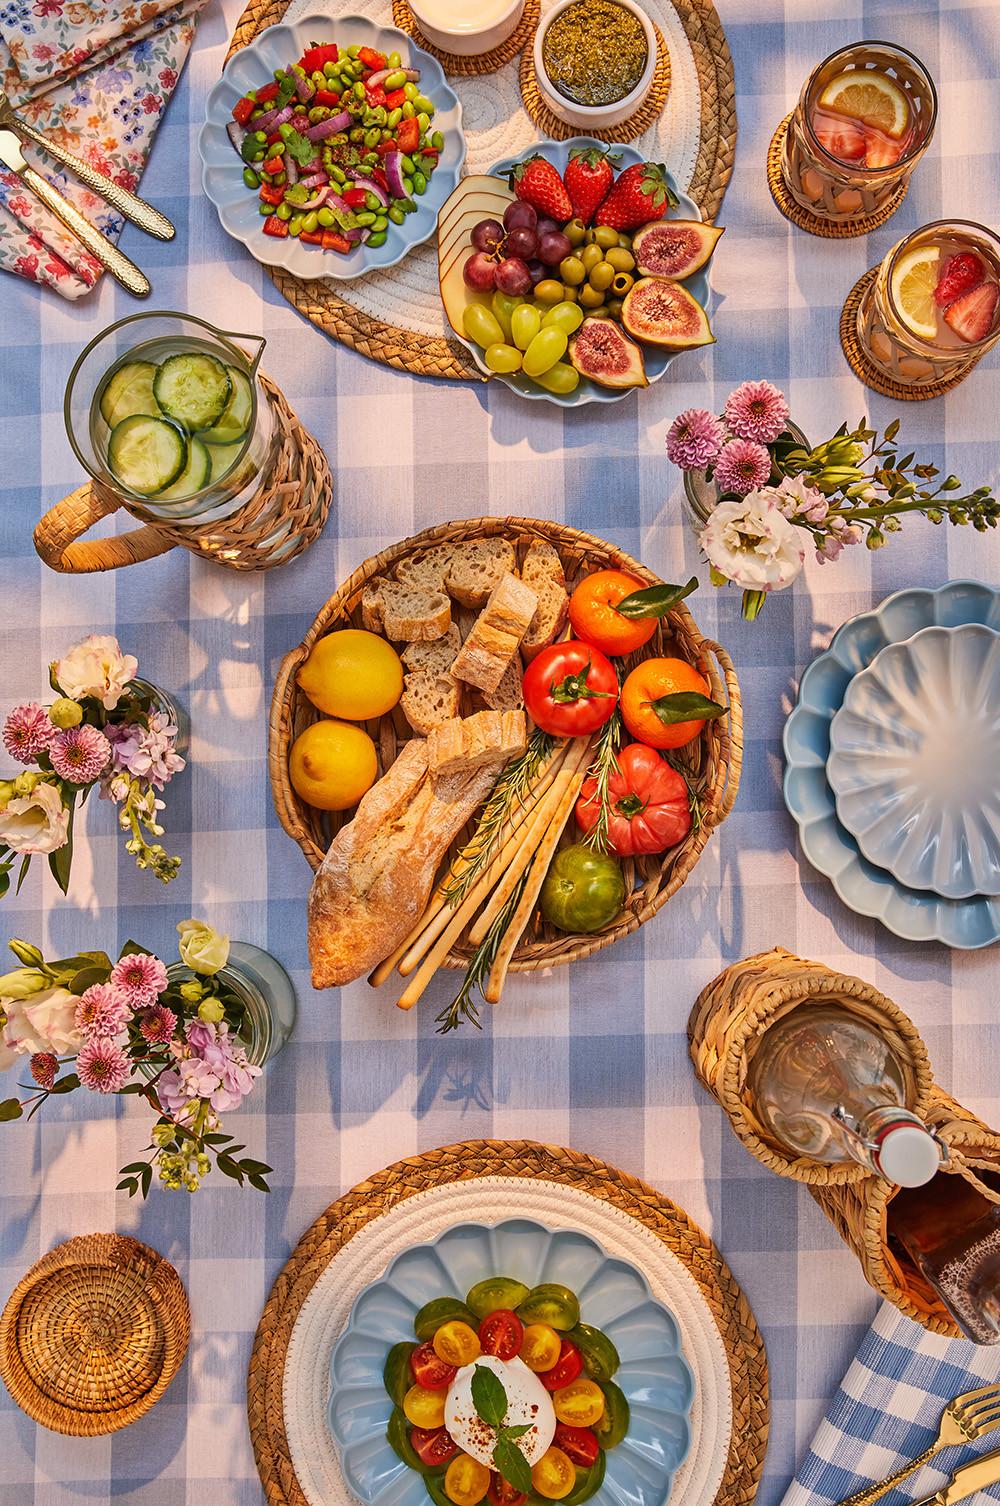 Table with blue gingham tablecloth, plates and baskets of food